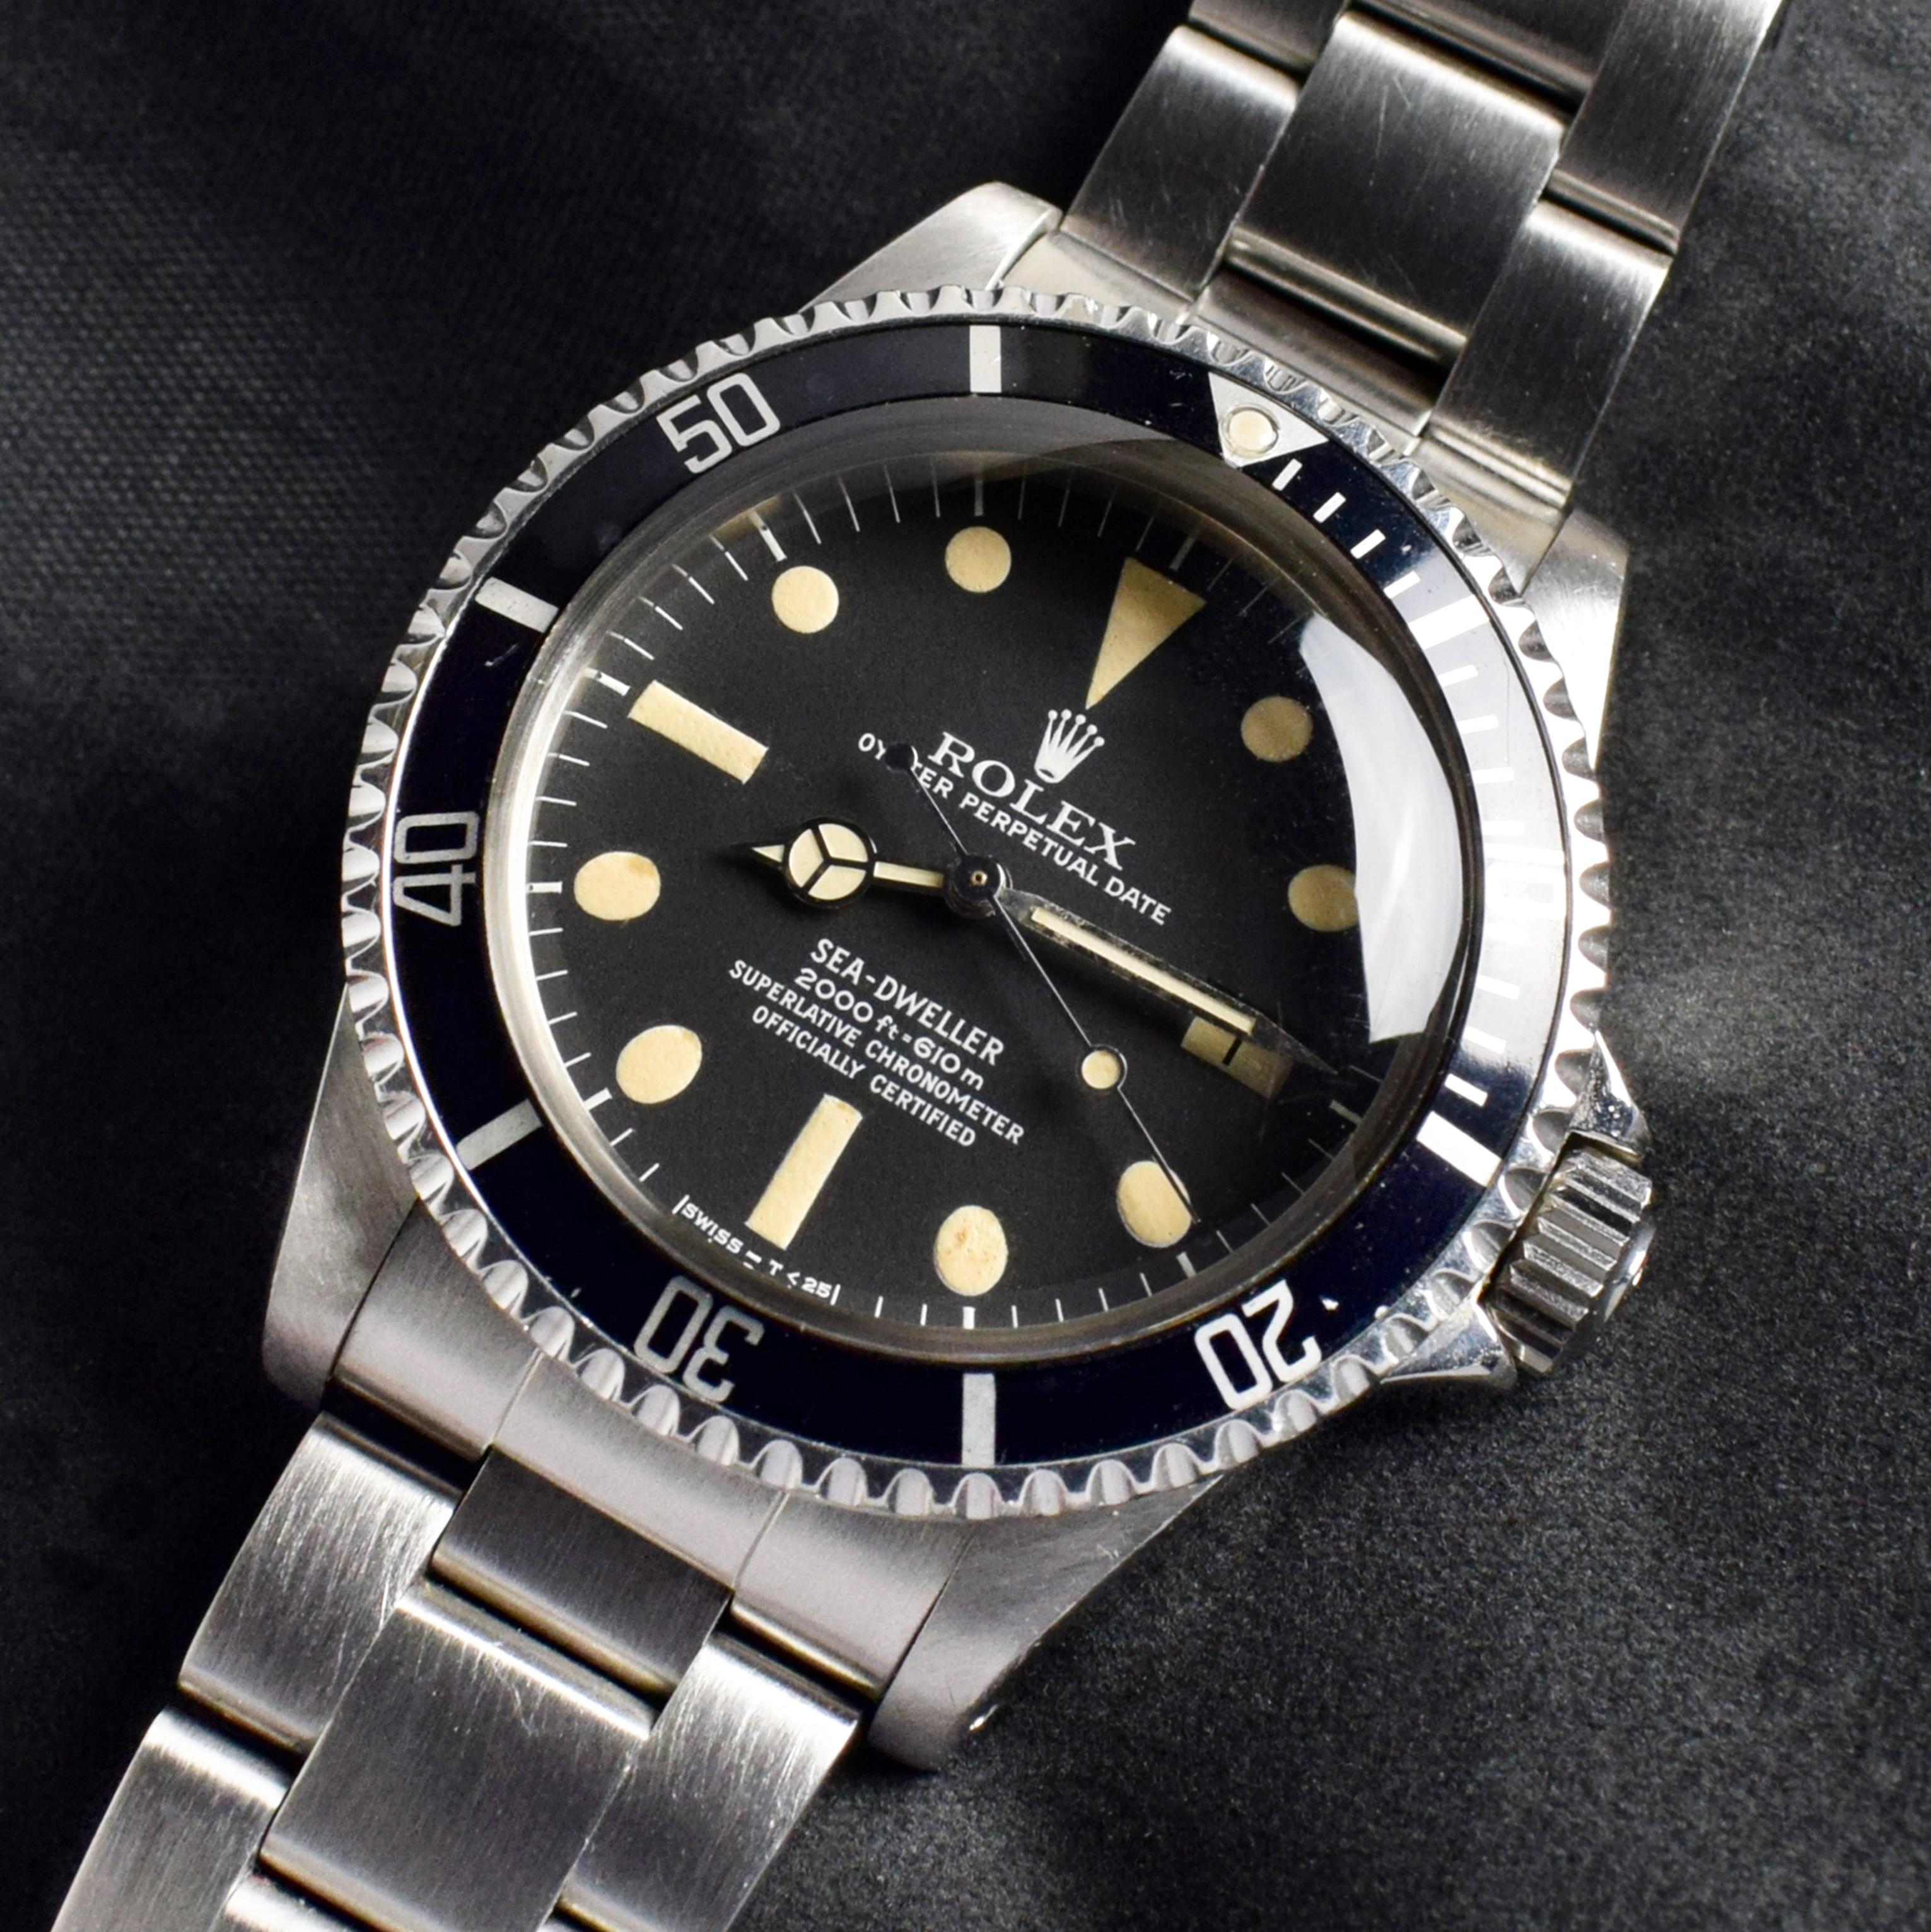 Brand: Vintage Rolex
Model: 1665
Year: 1979
Serial number: 61xxxxx
Reference: C03493

Case: Show sign of wear with slight polish from previous w/ 1665 stamped on inner case back

Dial: Excellent Aged Condition Matte Black Tritium Dial where the